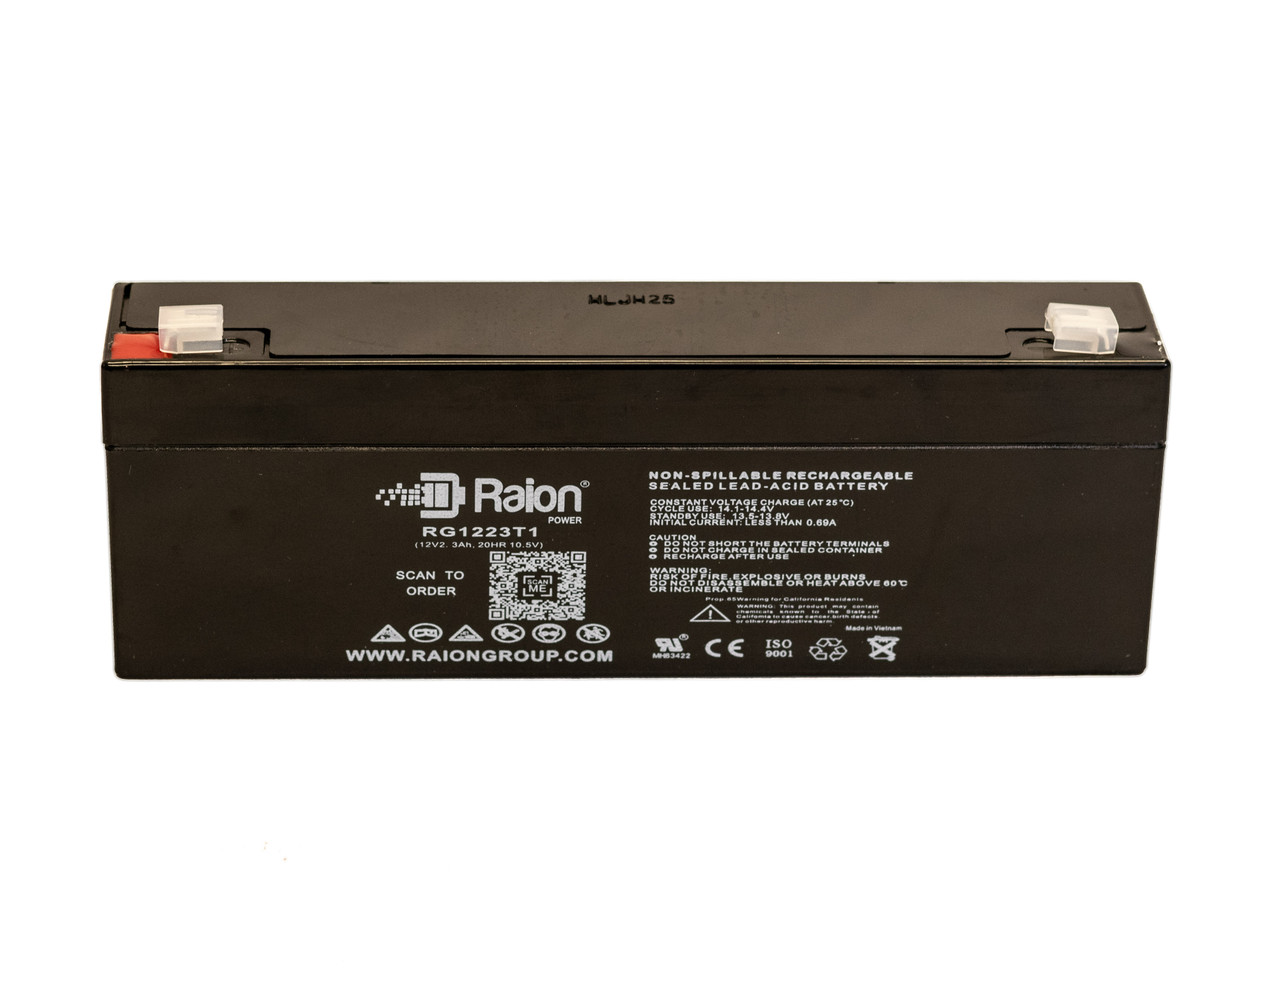 Raion Power 12V 2.3Ah SLA Battery With T1 Terminals For Medical Research Lab 500 Porta Pak Defibrillator